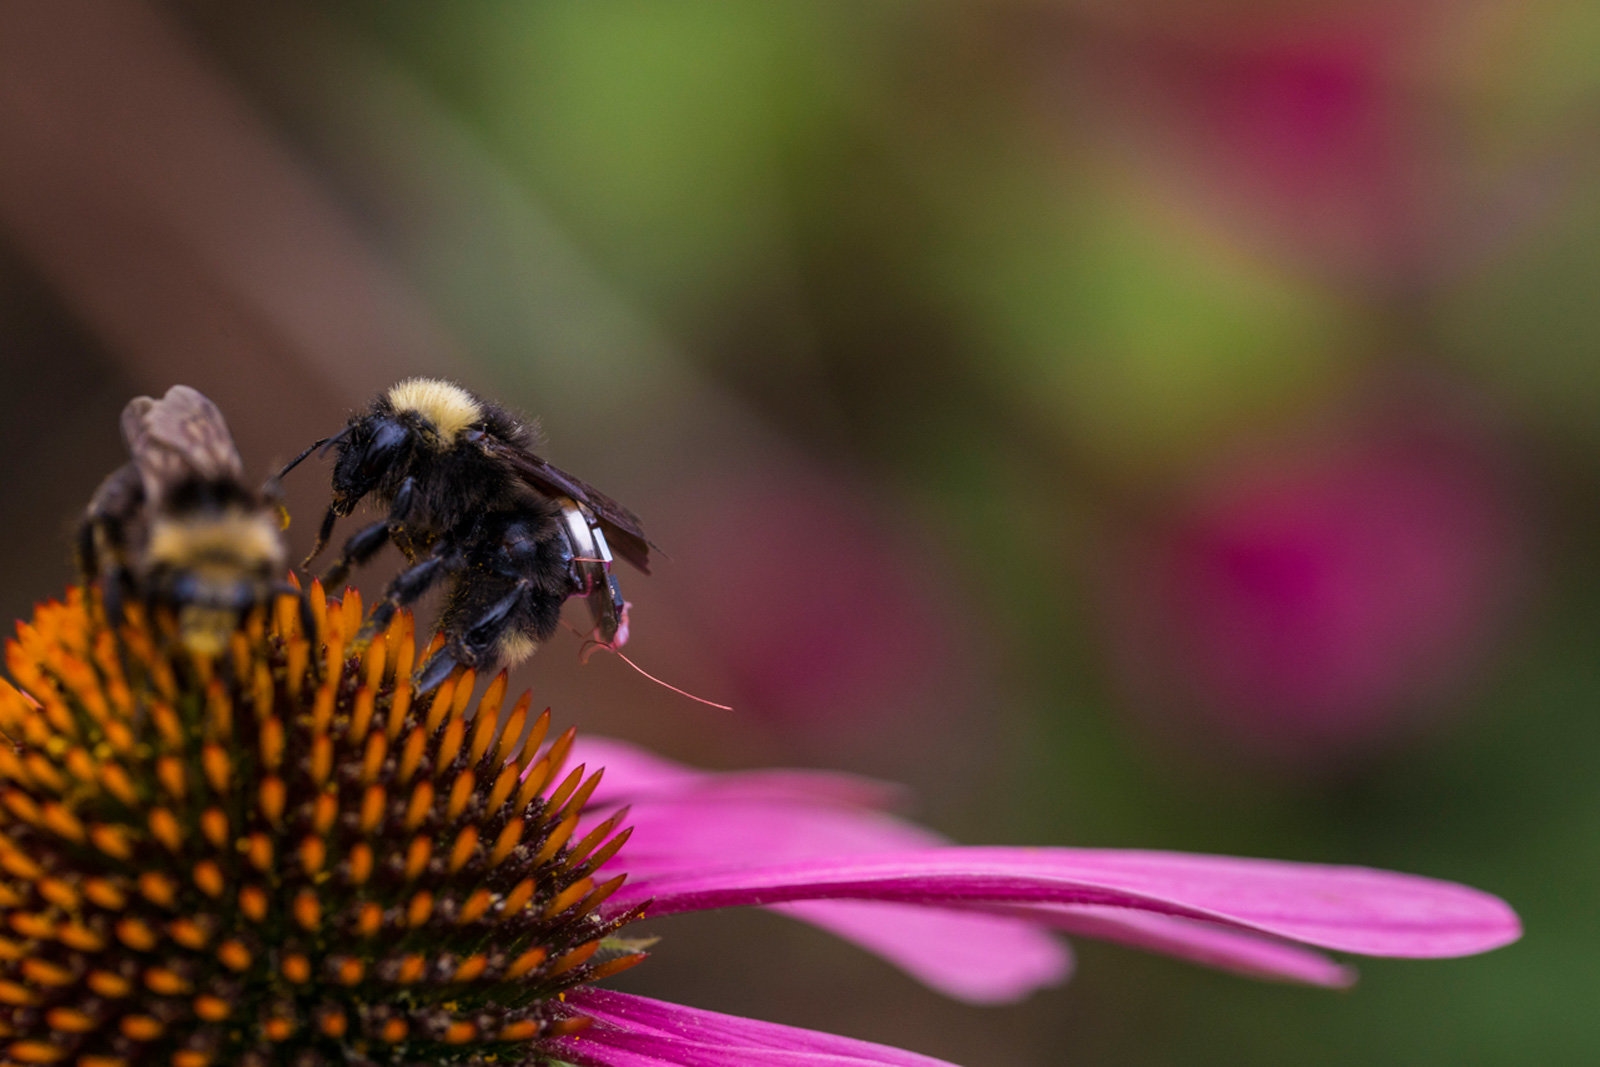 Bees with tiny sensor backpacks could help farmers track crops | DeviceDaily.com